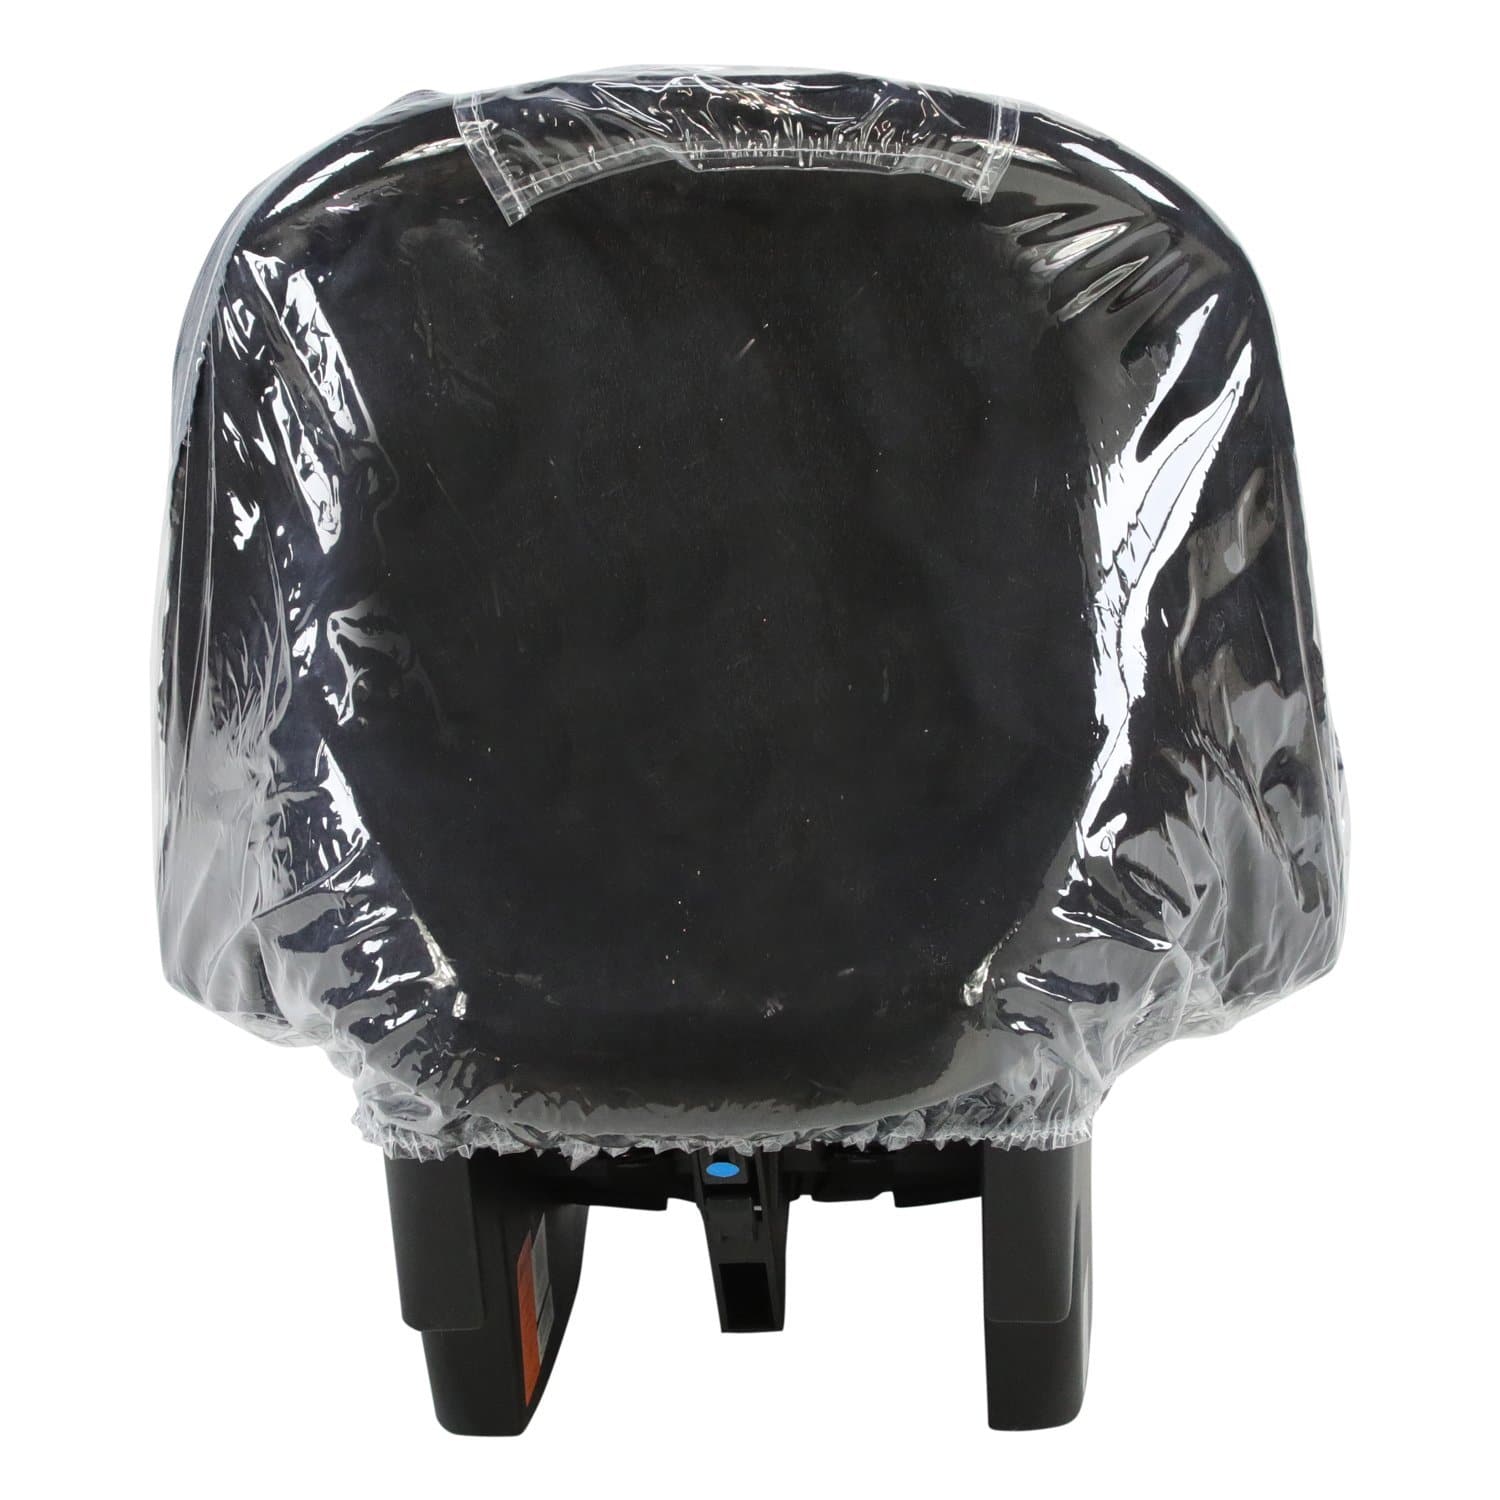 Car Seat Raincover Compatible With GB - For Your Little One